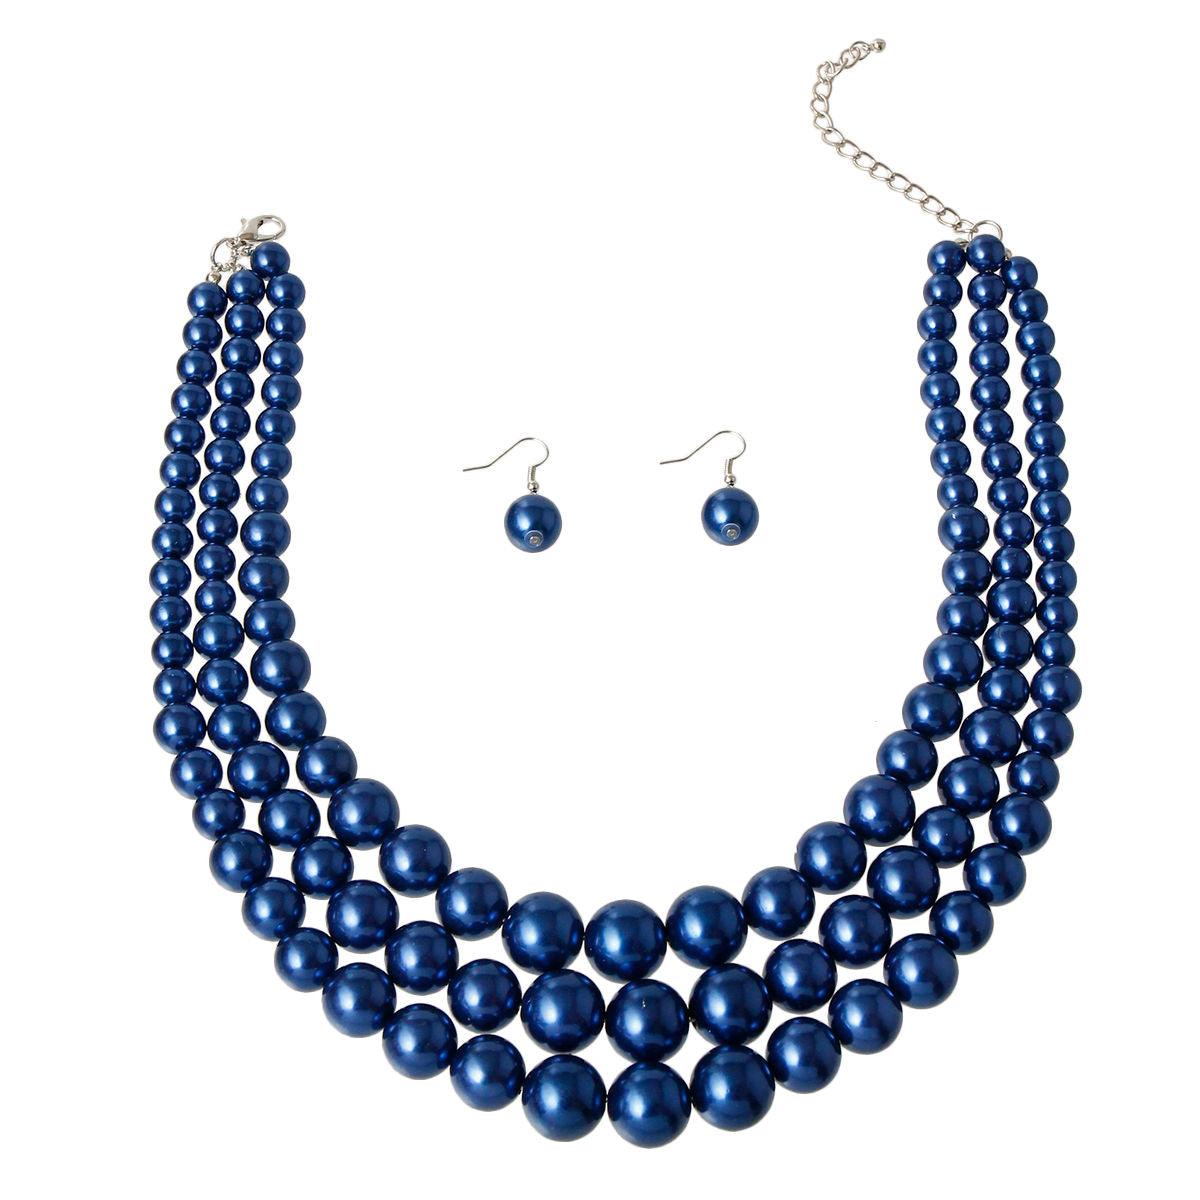 Lustrous Celebration Triple Strand Blue Pearl Necklace Set - Stunning Gems for Unforgettable Moments!